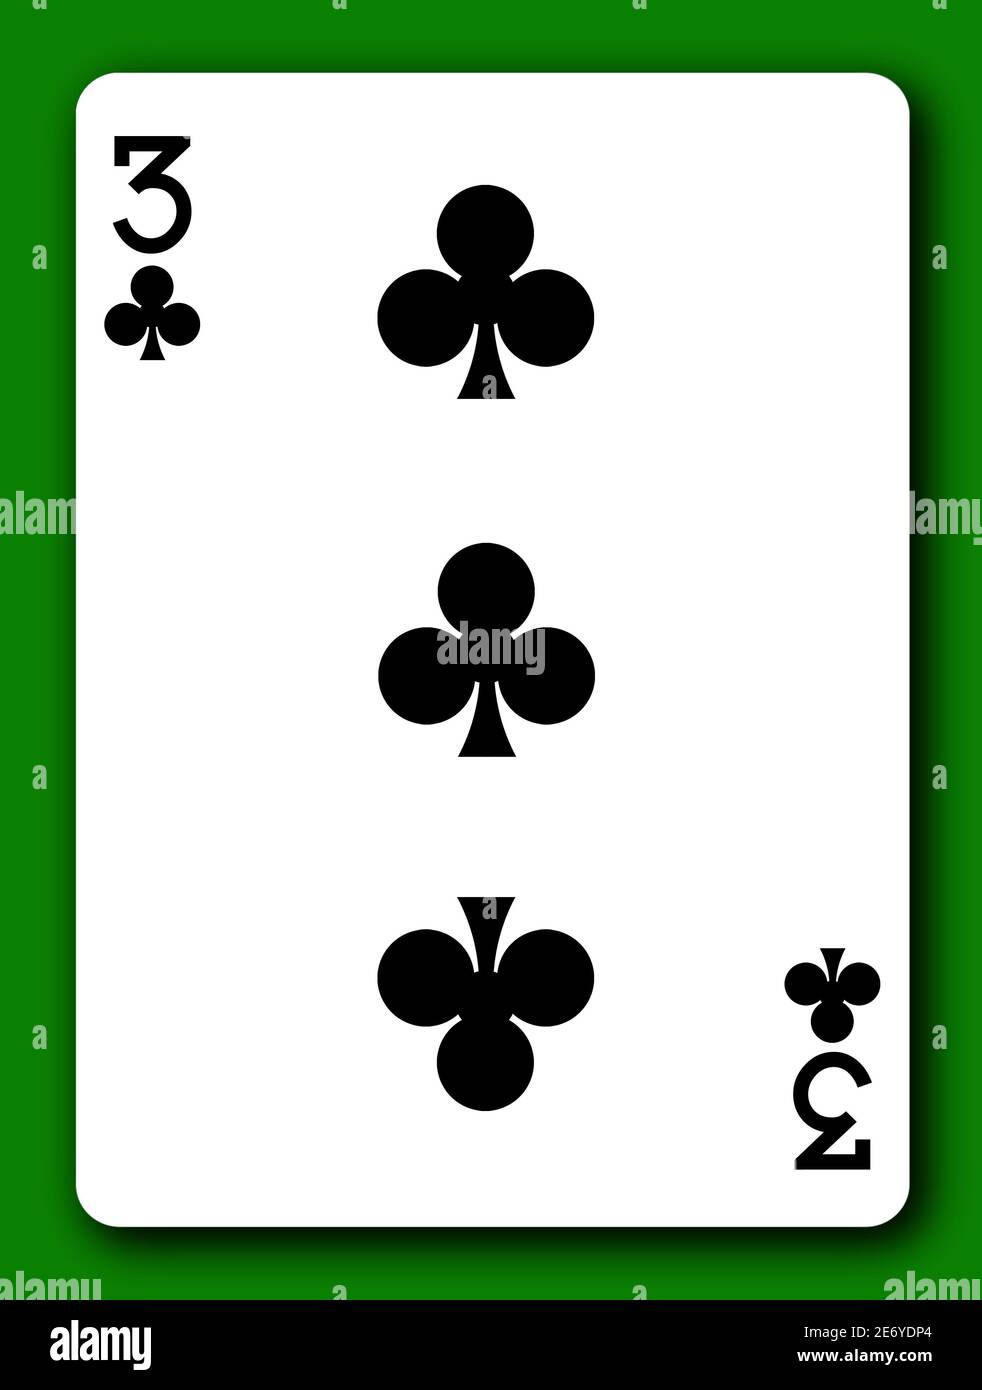 3 Three of Clubs playing card with clipping path to remove background and shadow 3d illustration Stock Photo